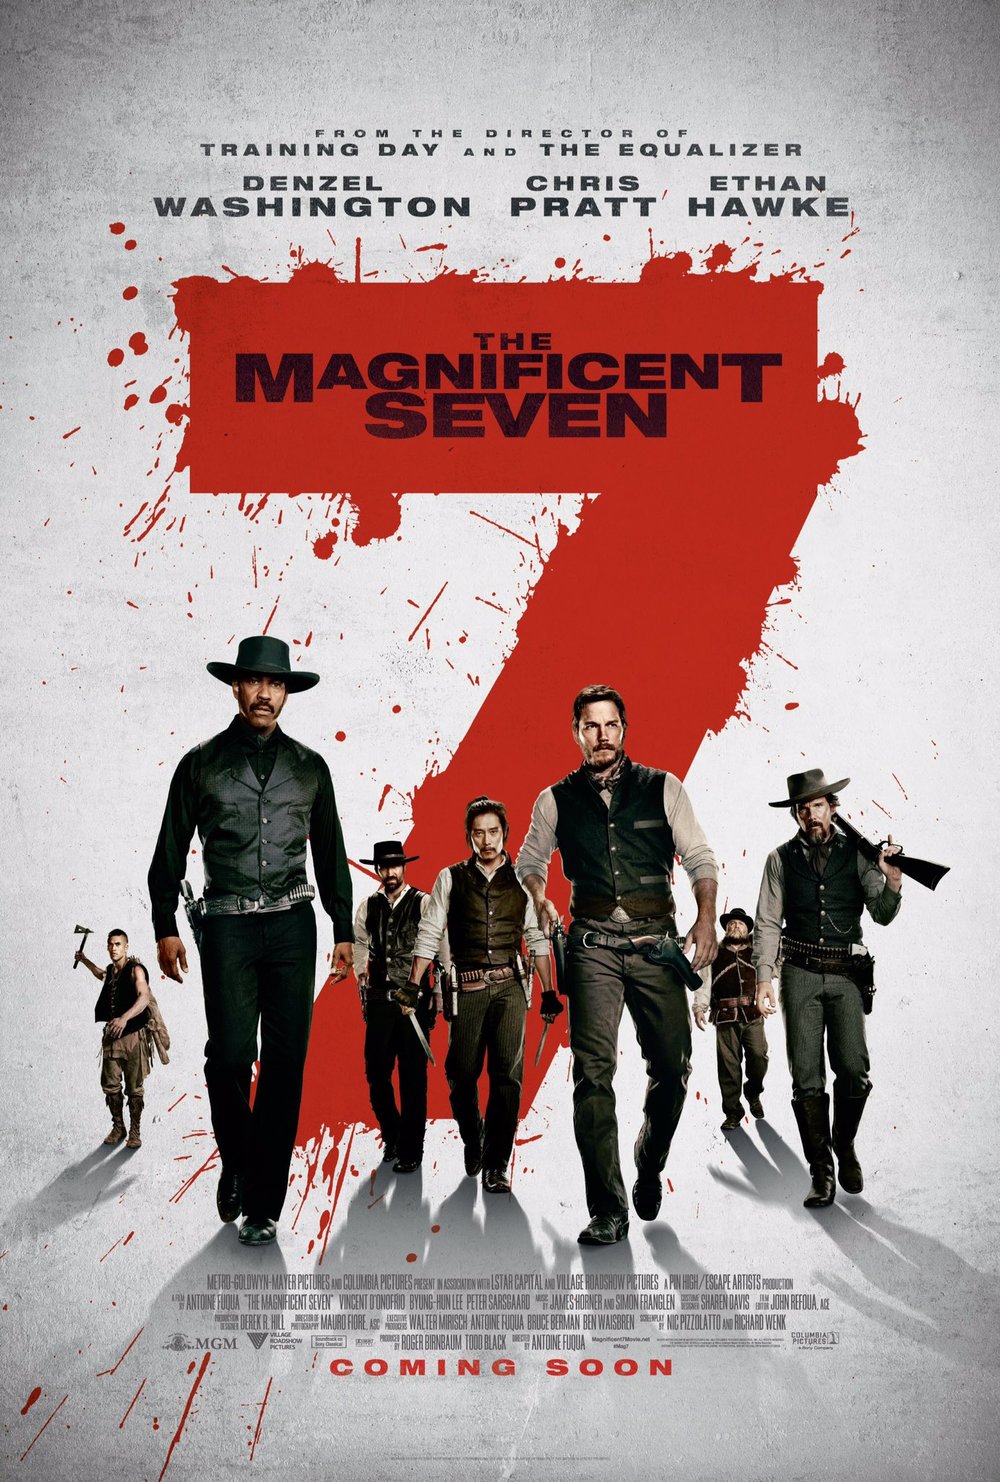 Themagnificentseven